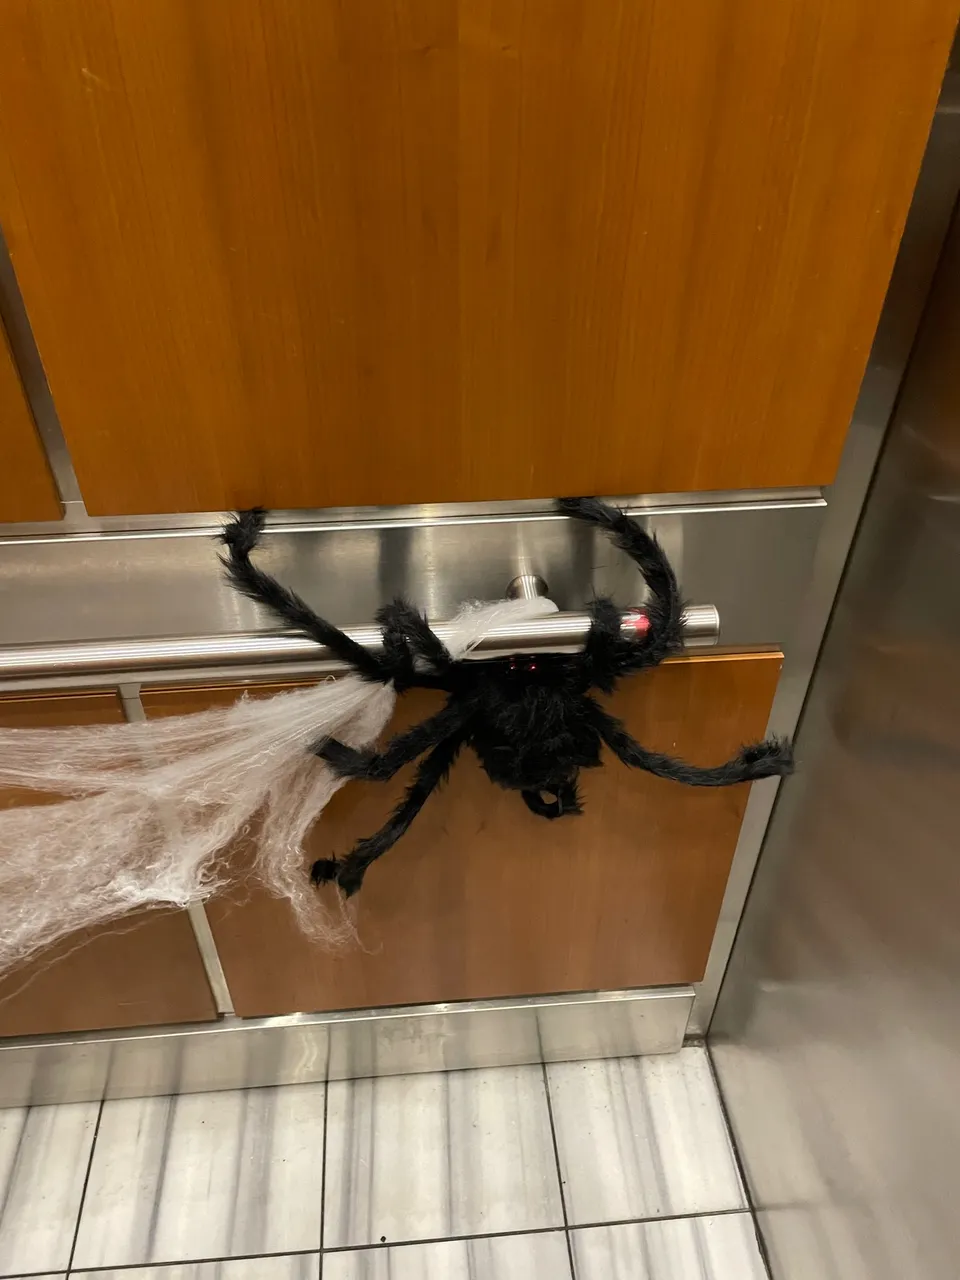 a large black and white spider hanging from a door